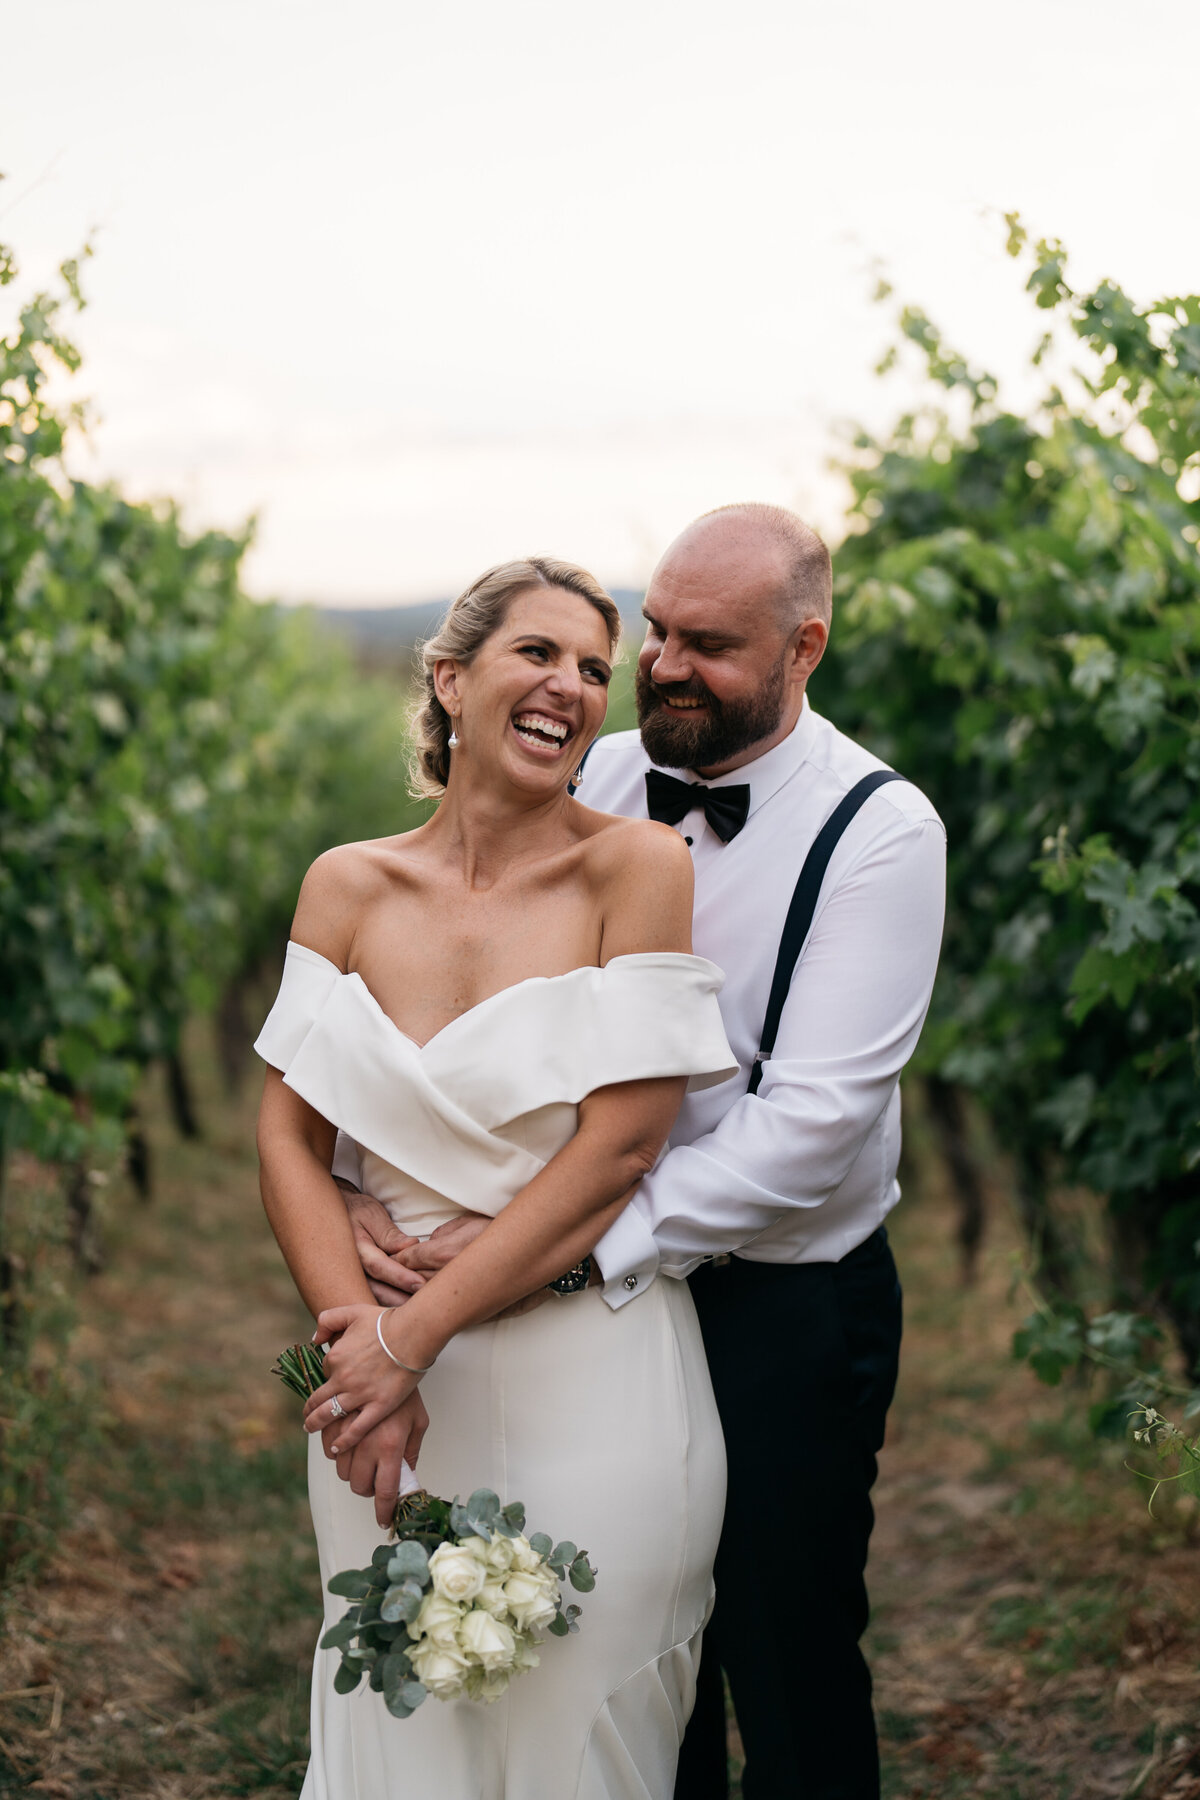 Courtney Laura Photography, Stones of the Yarra Valley, Yarra Valley Weddings Photographer, Samantha and Kyle-1007